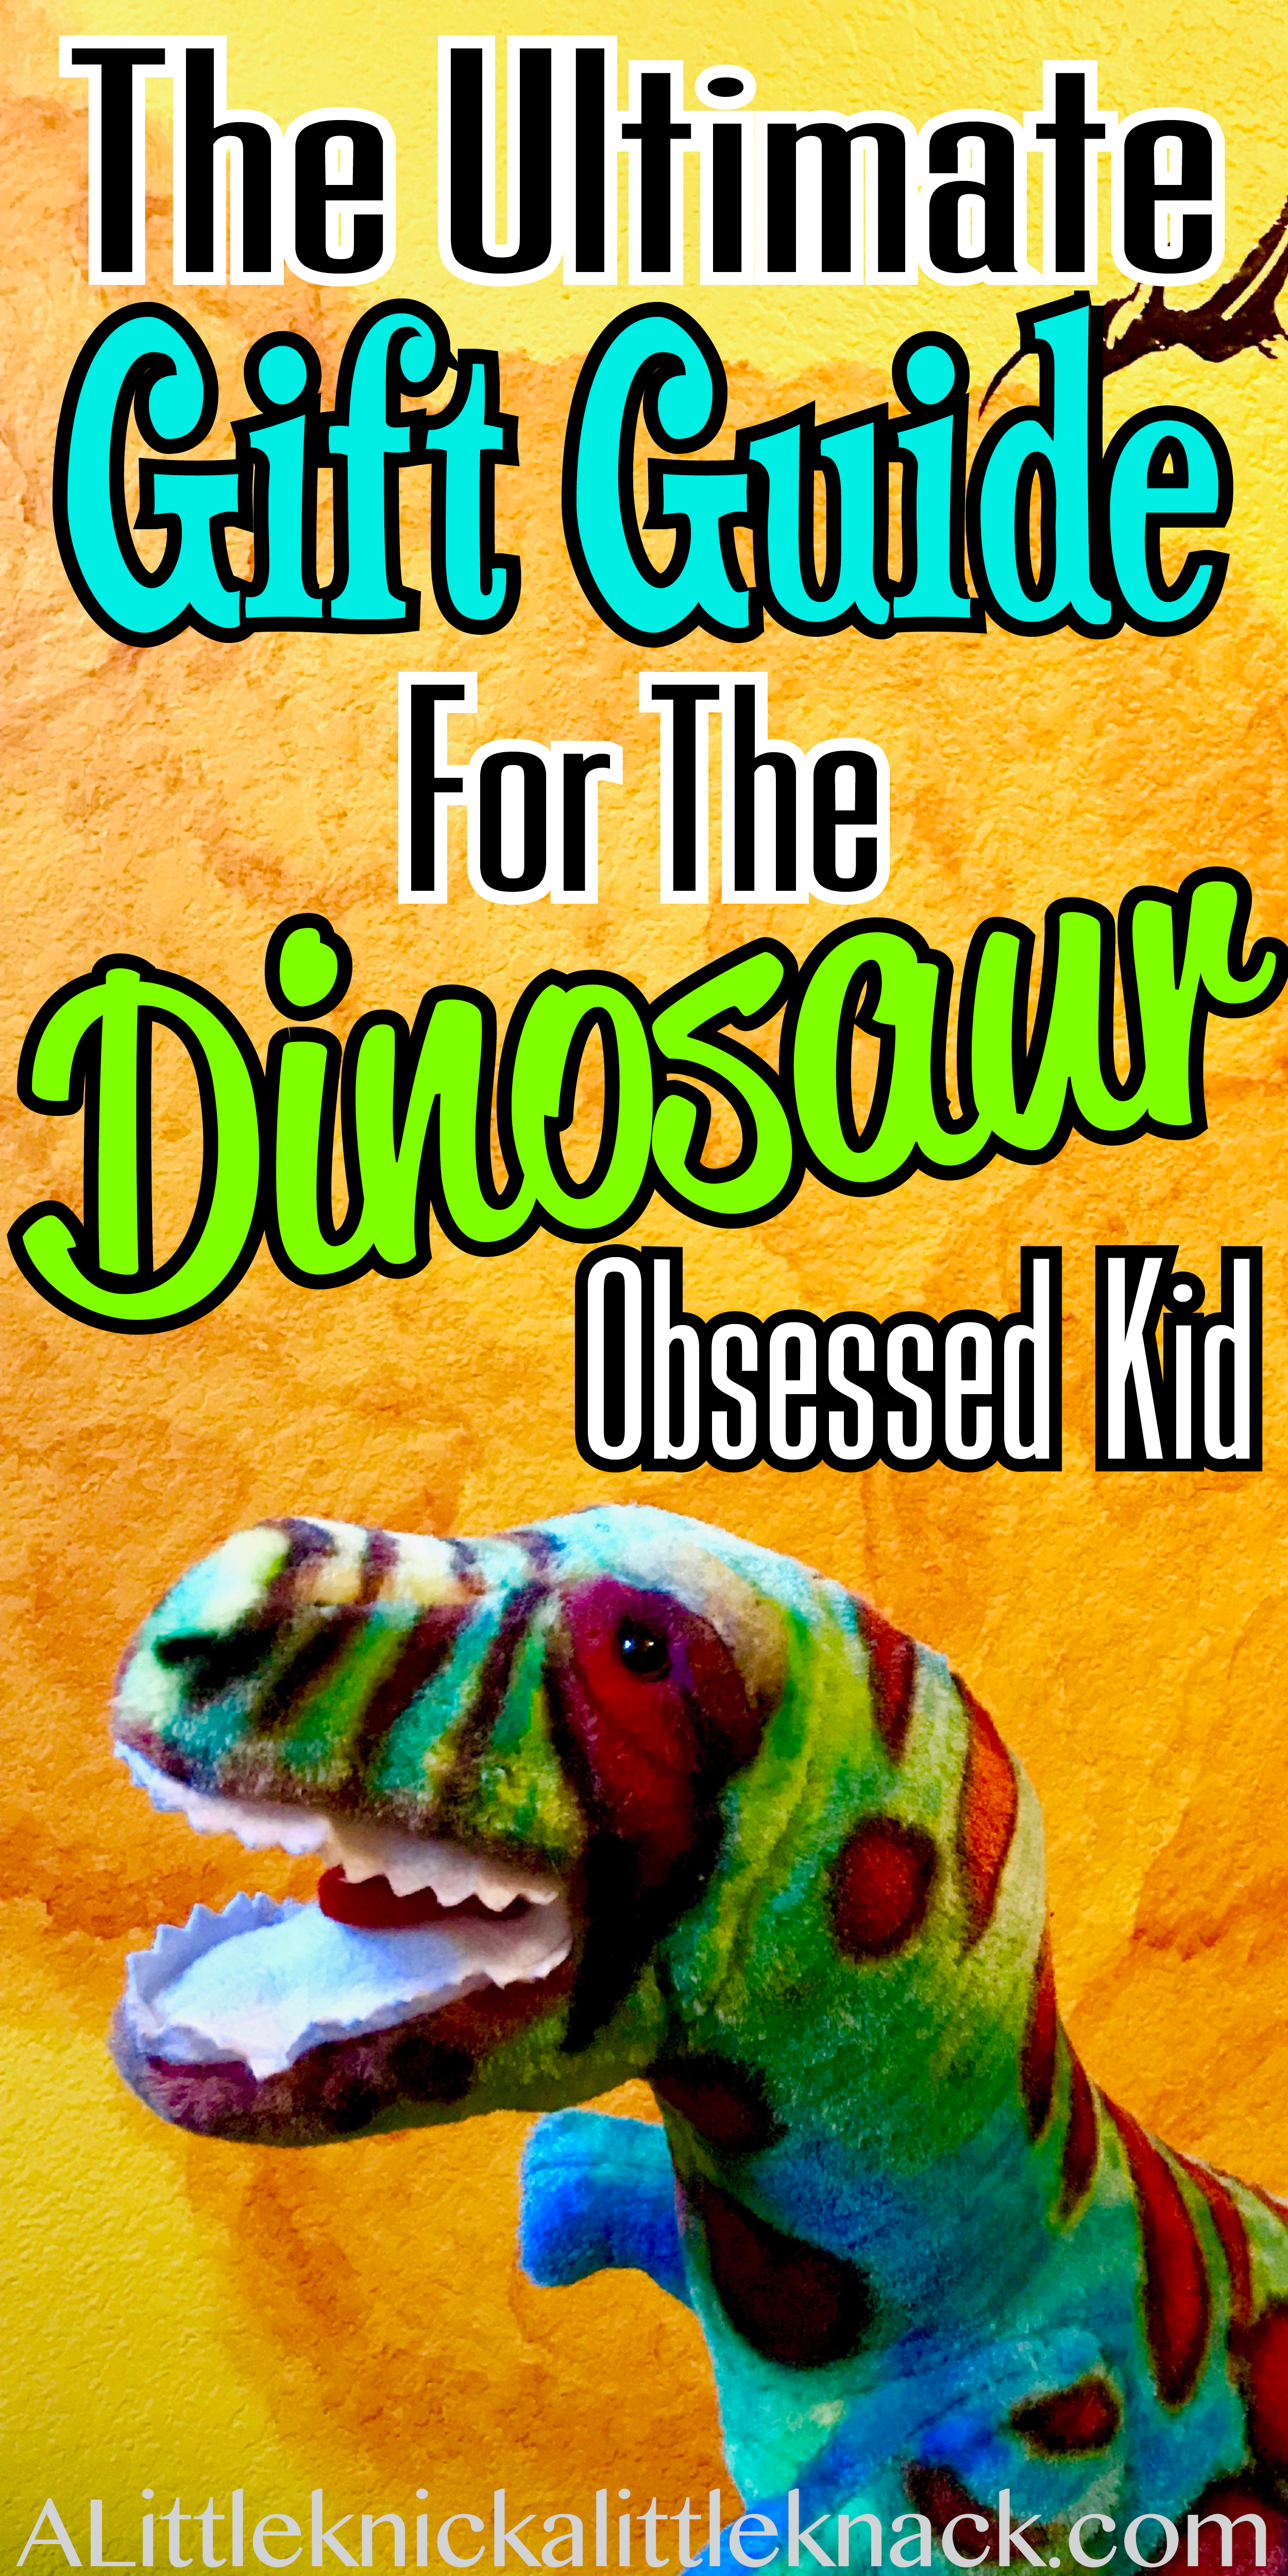 Trying to figure out what to get your dinosaur obsessed kiddo this christmas? Look no further I have you covered! #giftguide